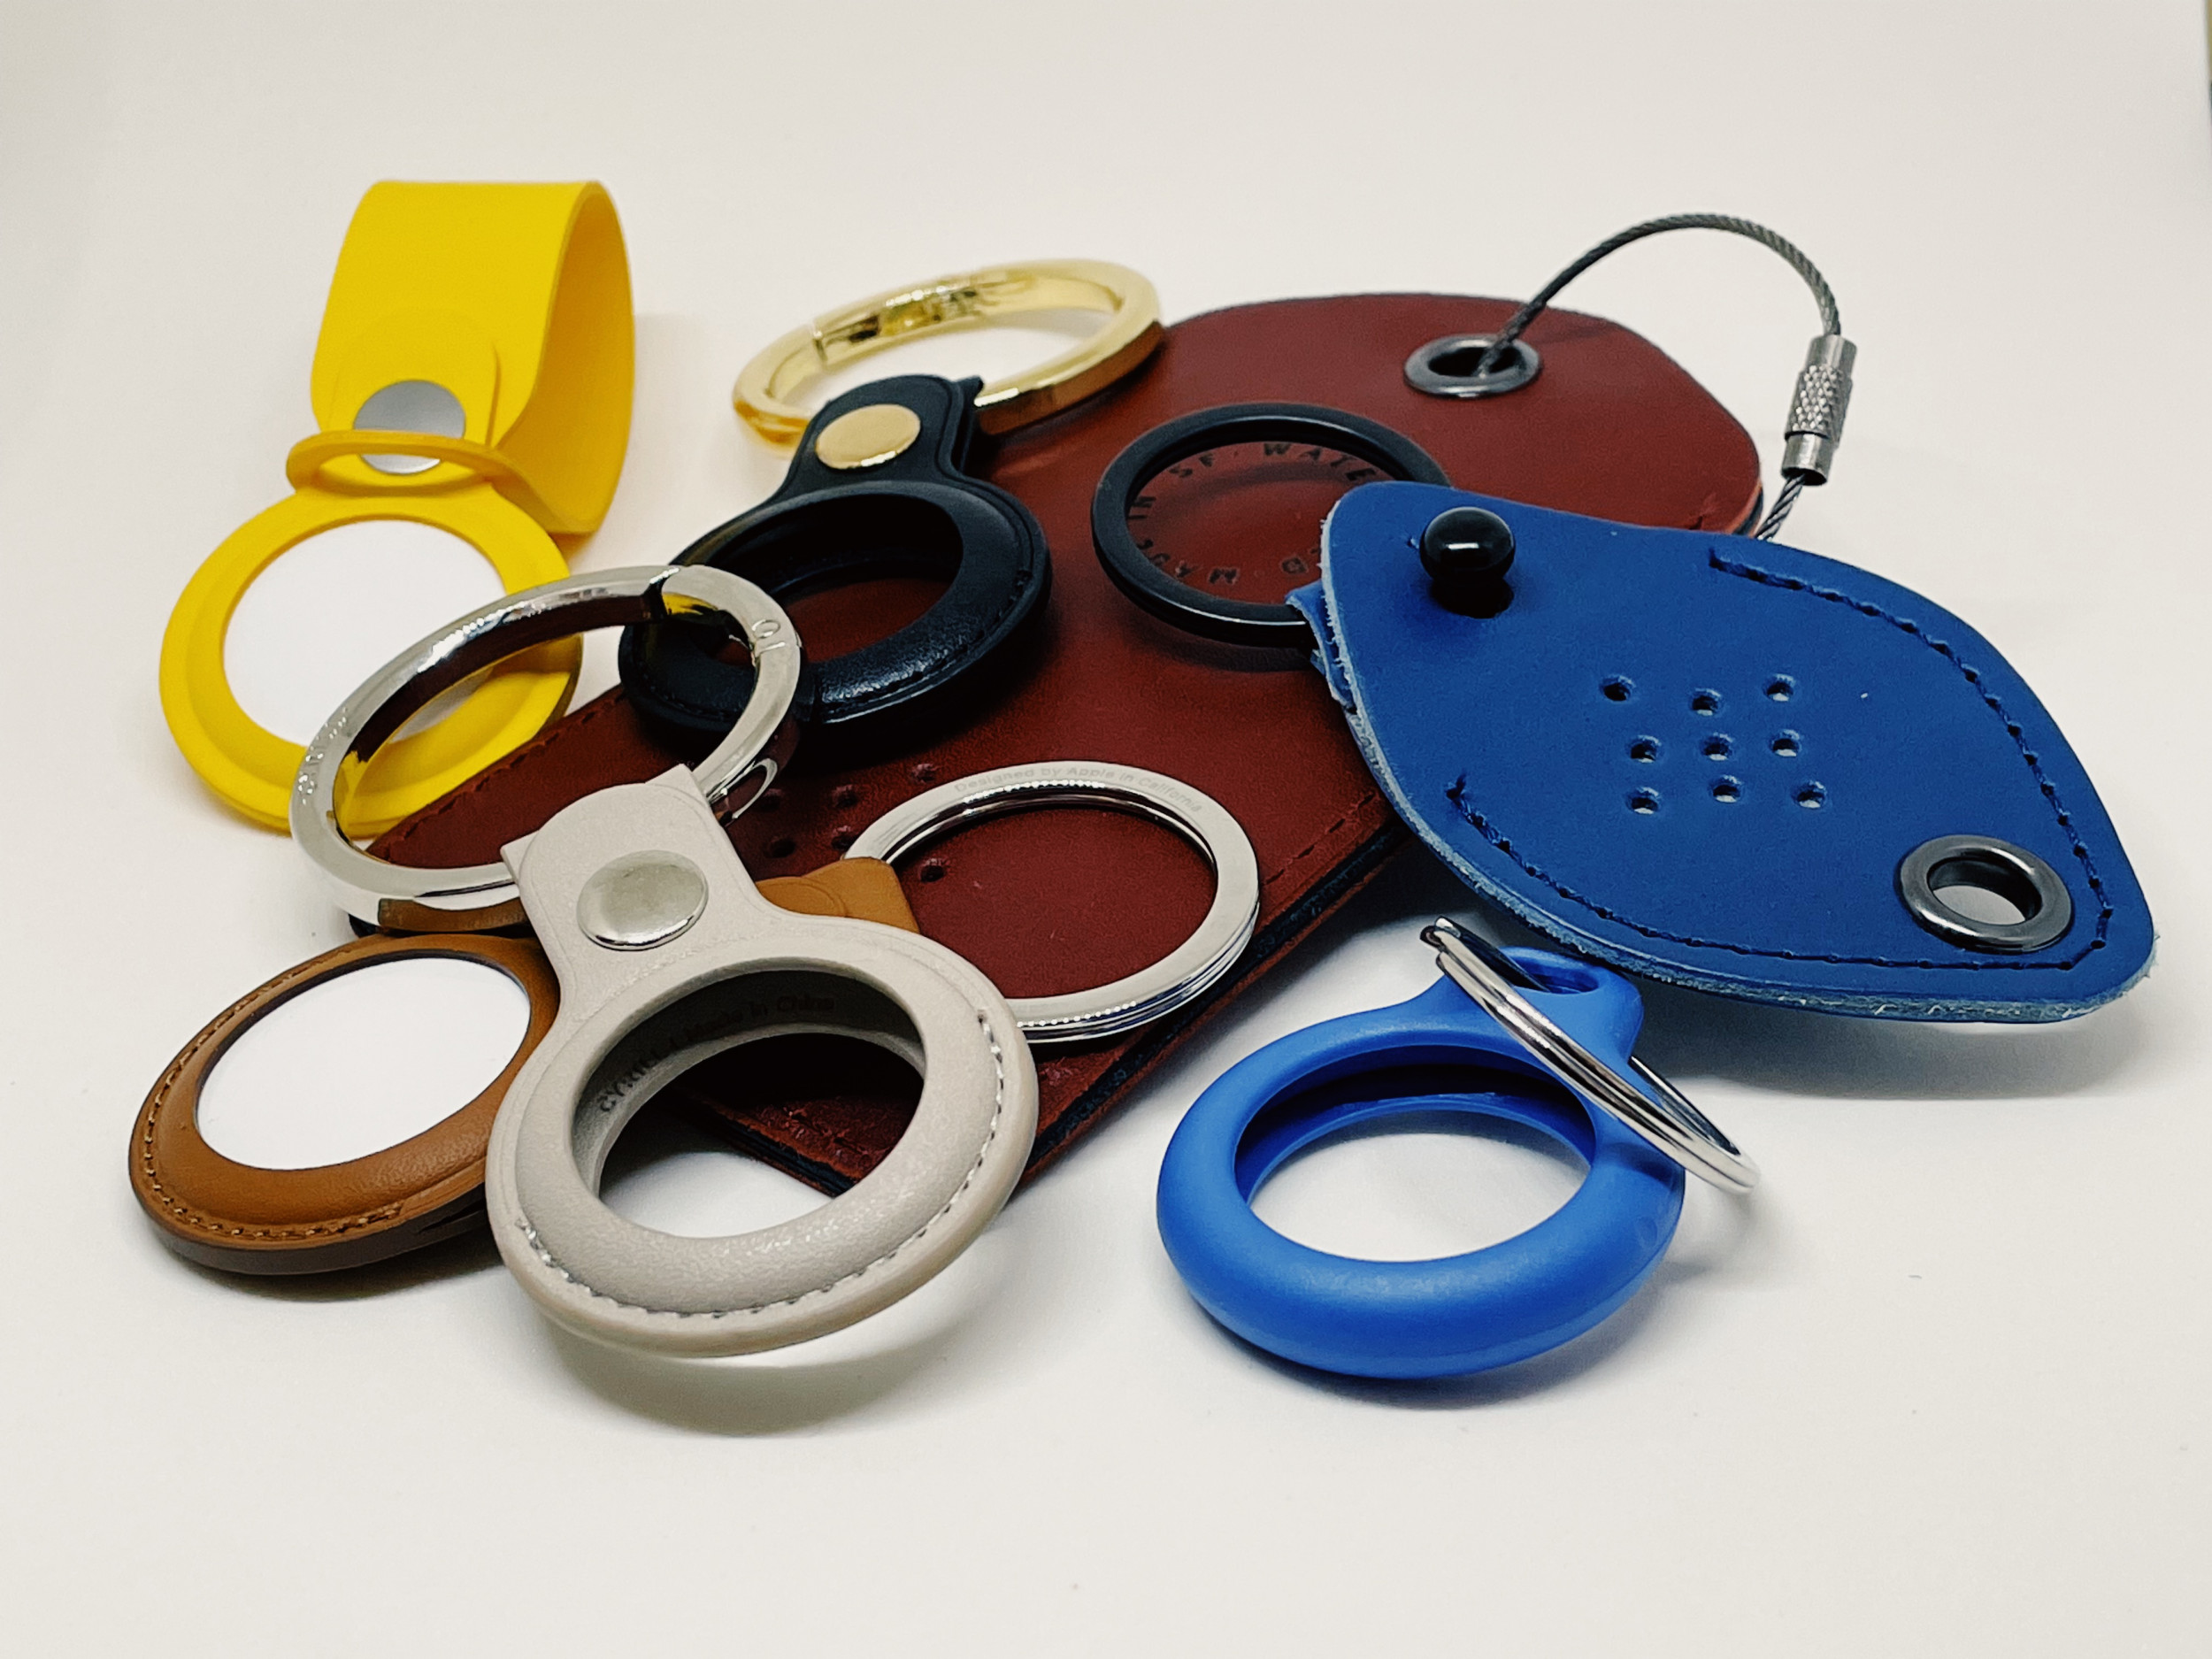 Nomad Leather Keychain review: A better AirTag keyring